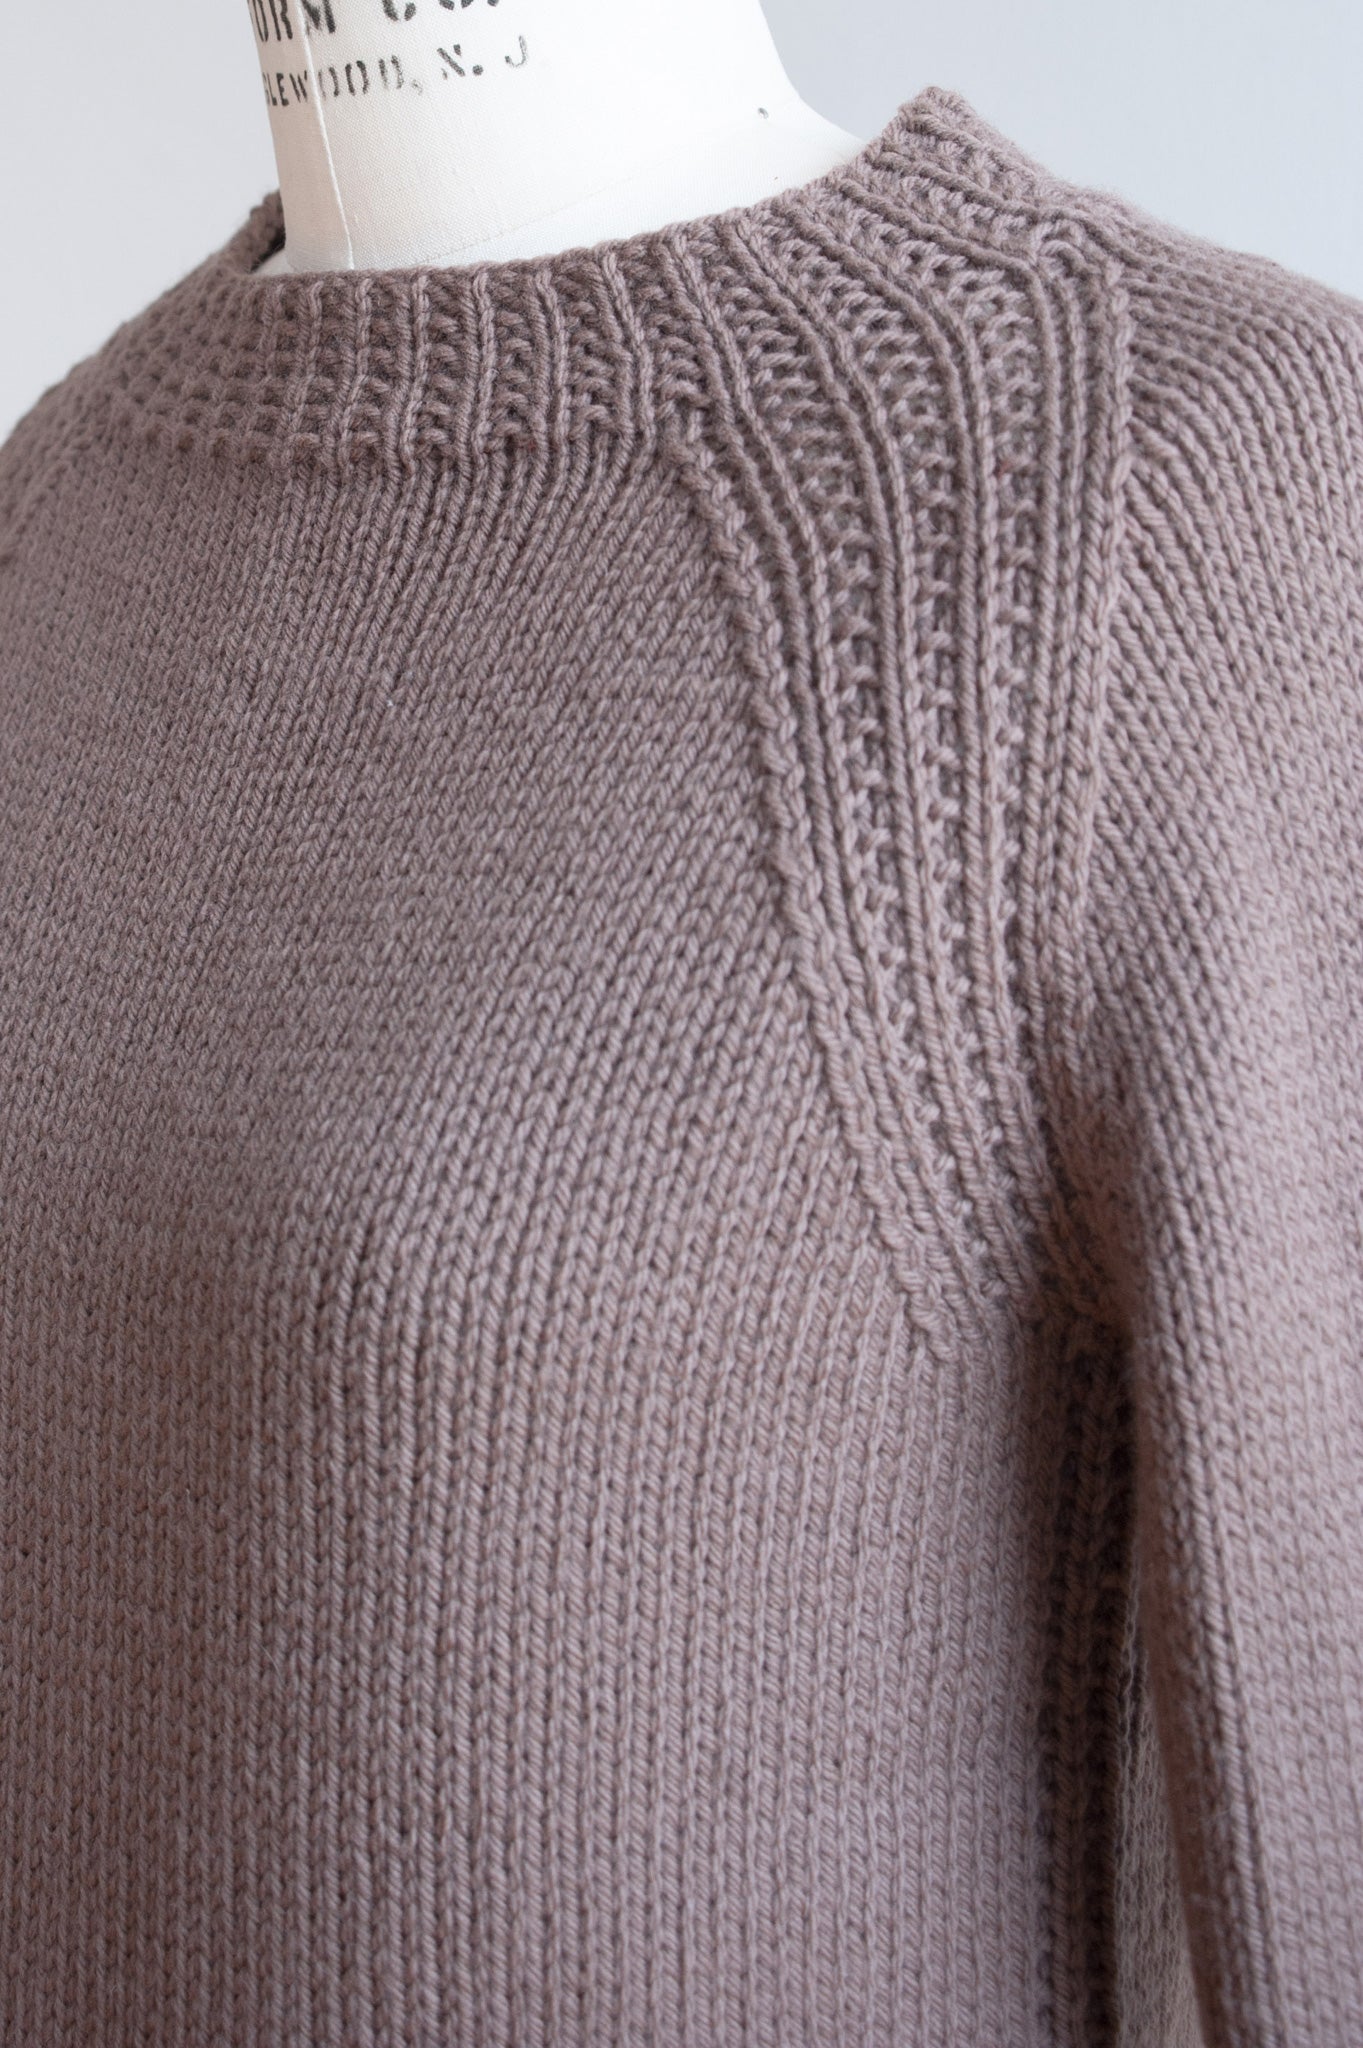 dale pullover knitting pattern – Quince & Co.